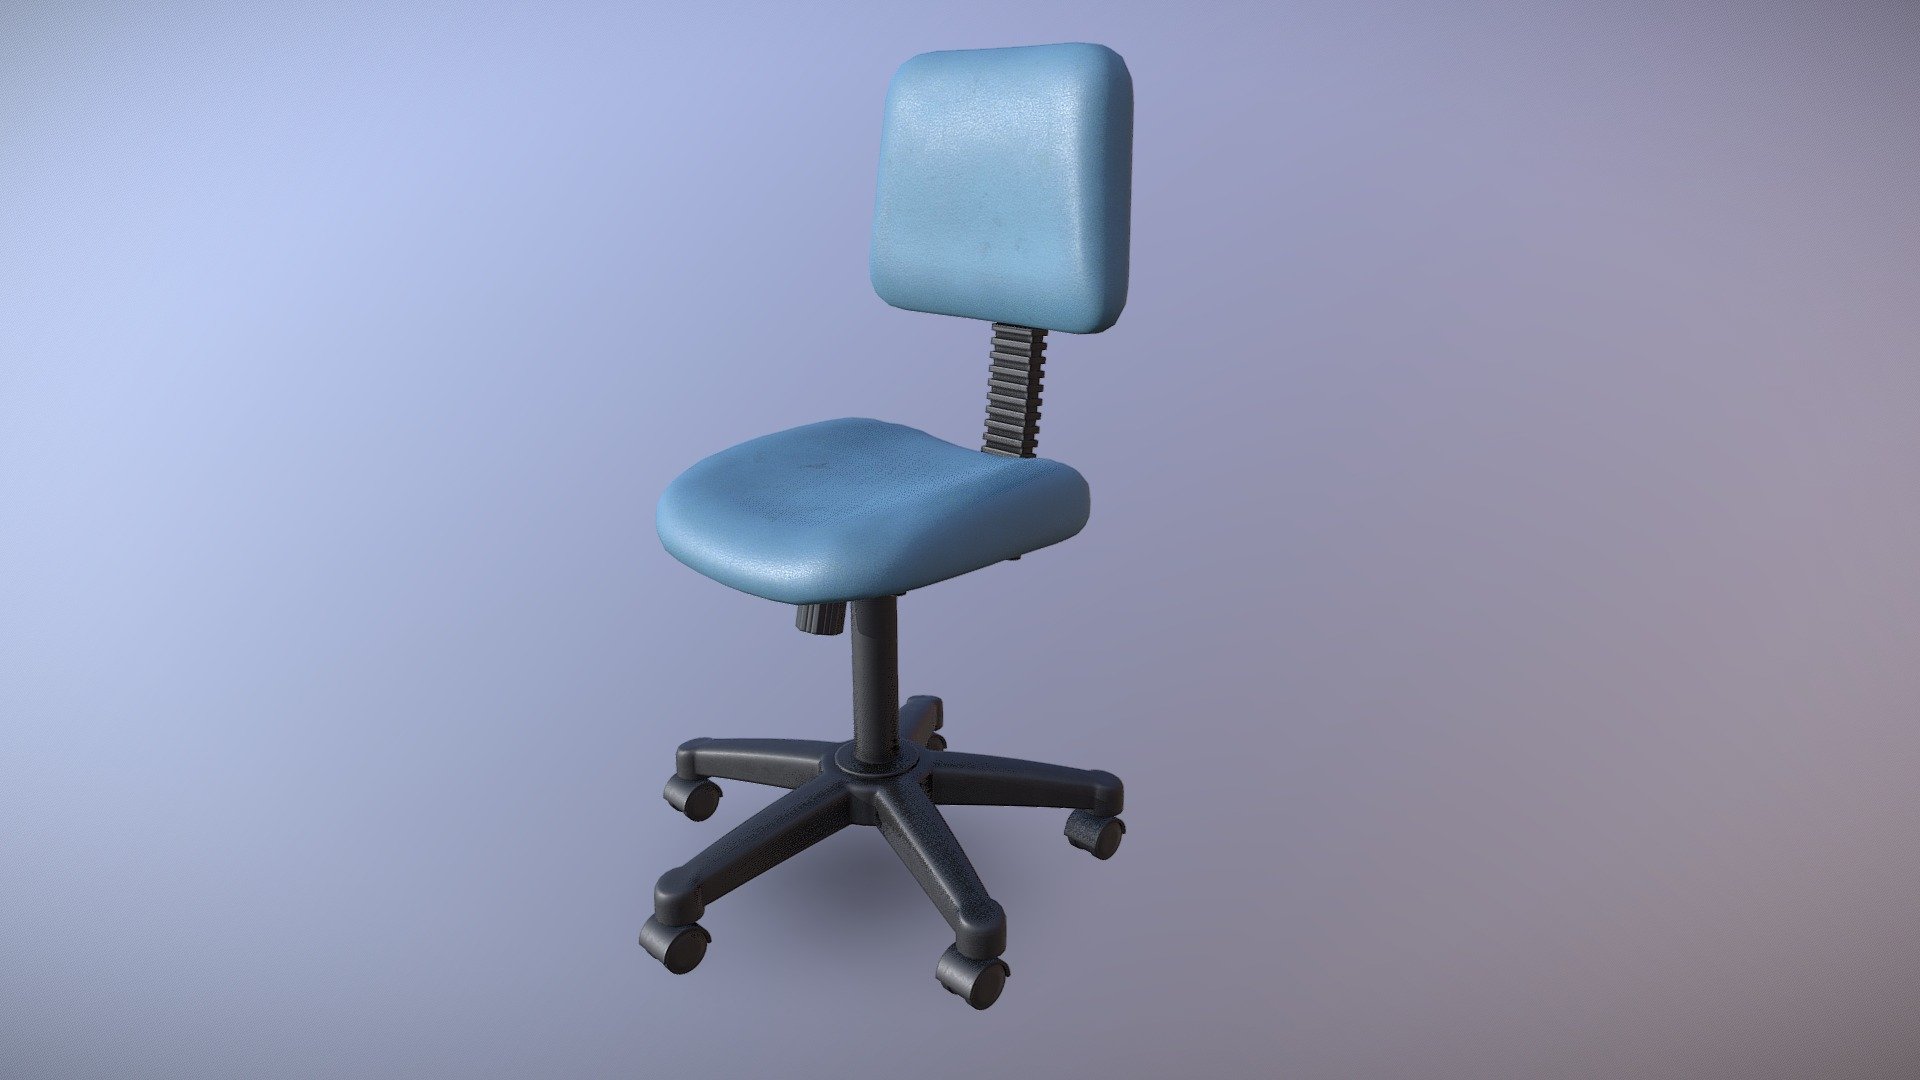 Office chair for PBR game engines.

Originally modeled in 3ds Max 2019. Download includes .max, .fbx, .obj, metal/roughness PBR textures, specular/gloss PBR textures, textures for Unity and Unreal Engines, and additional texture maps such as curvature, and UV templates.

Specs

Model is in quads and tris, no n-gons Scaled to approximate real world size (centiemters) Texture paths are stripped Textures

1 Material: 2048x2048 PBR BaseColor/Metalness/Roughness/Normal/AO

Unity Engine 5 Textures: AlbedoTransparency, MetallicSmoothness, Normal, Occlusion

Unreal Engine 4 Textures: BaseColor, Normal, RoughnessMetallicAO - Office Chair - 3D model by Luchador (@Luchador90) 3d model